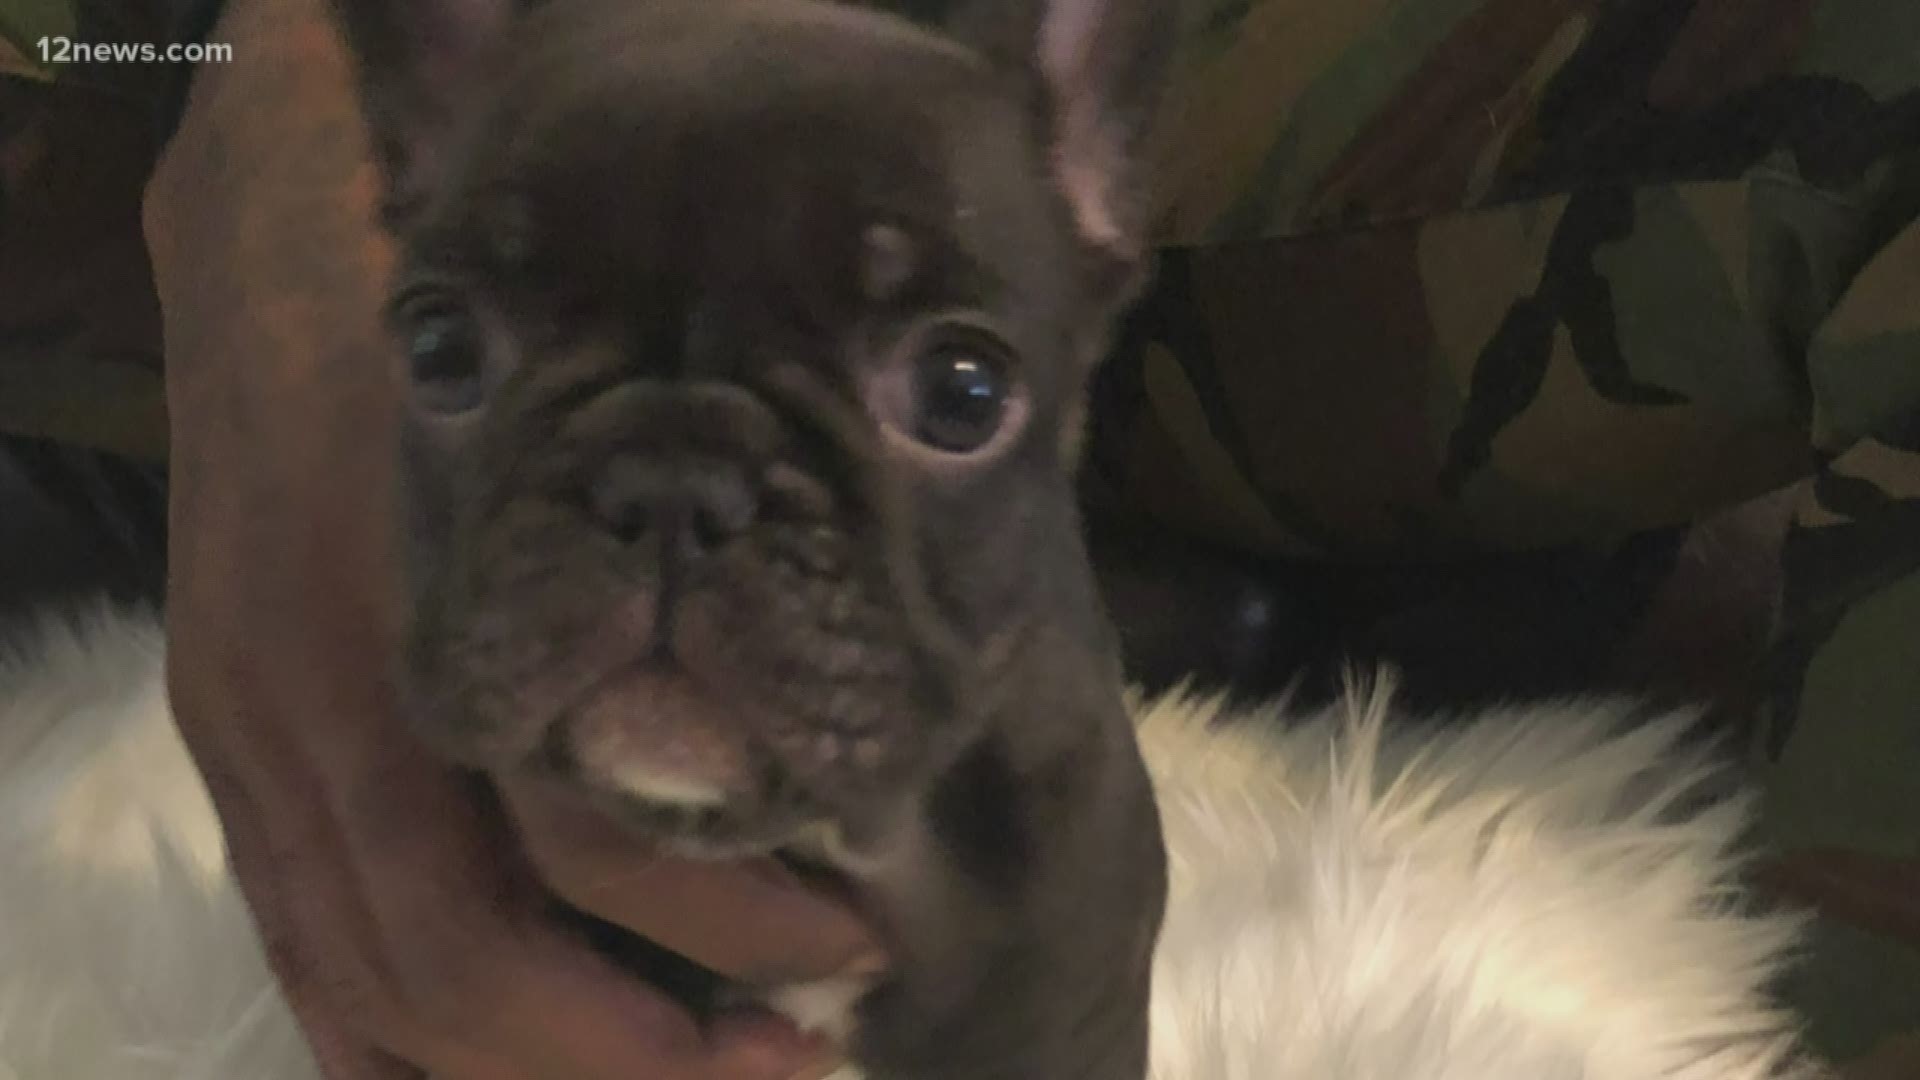 A woman is attempting to steal French bulldog puppies from breeders. The dogs sell for several thousand dollars. She did steal one puppy from a Peoria breeder.